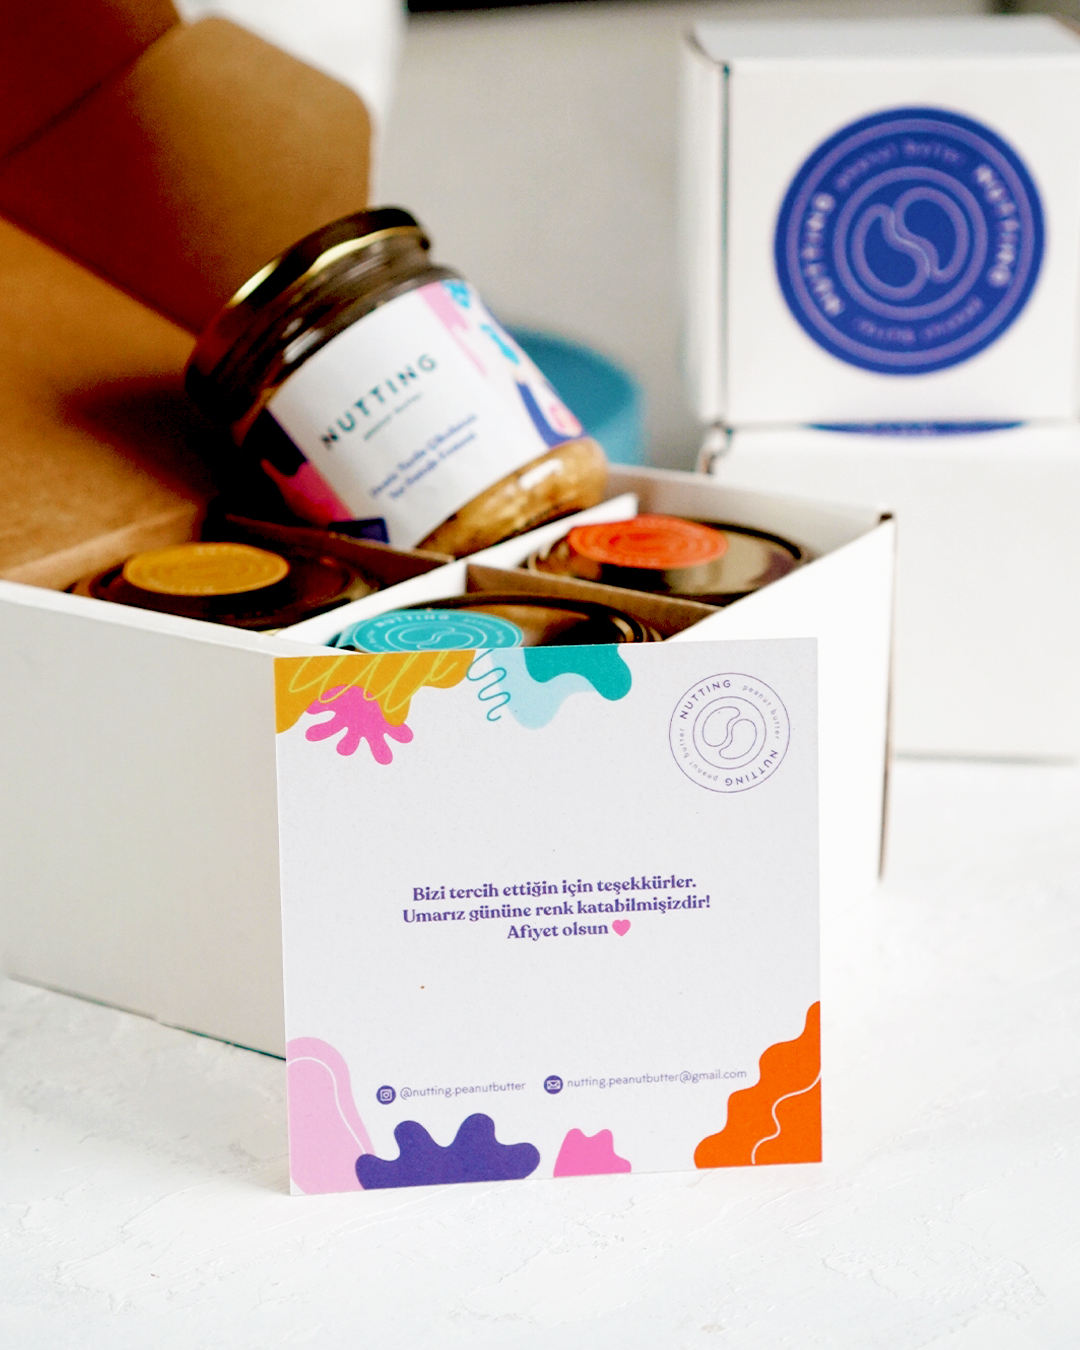 Nutting Peanut Butter: A Colourful and Playful Packaging Design for a Healthy Brand